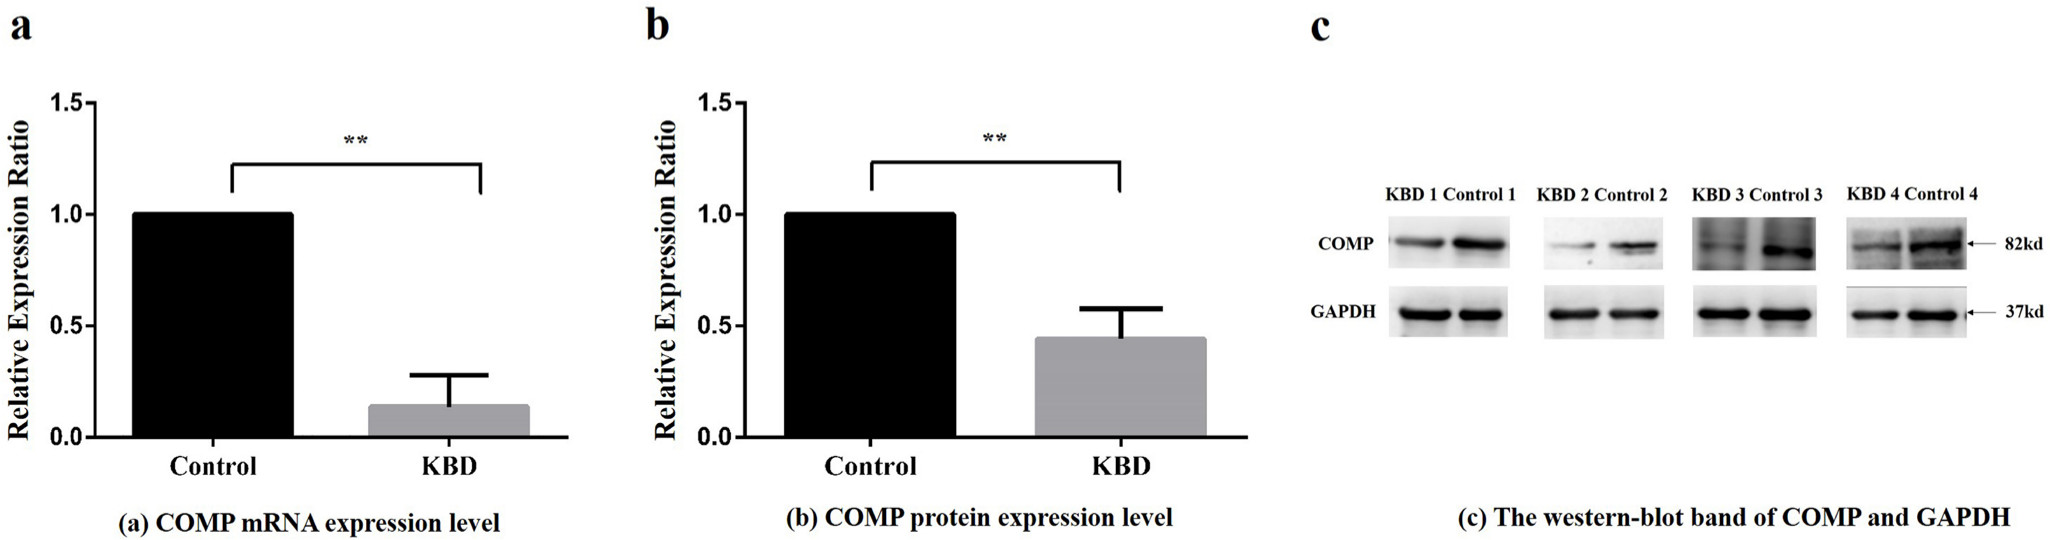 Fig. 1 
            Relative expression ratio of cartilage oligosaccharide matrix protein (COMP) in messenger RNA (mRNA) and protein scales between Kashin-Beck disease (KBD) patients and controls. a) Relative expression ratio of COMP mRNA between KBD patients and normal controls. Compared with the control group, **p < 0.01. b) Relative protein expression ratio of average integrated optical density (IOD) value extracted from western blot band of COMP between KBD patients and controls. IOD compared with the control group, **p < 0.01. c) The western blot band of COMP and reference protein glyceraldehyde-3-phosphate dehydrogenase (GAPDH) in four KBD patients and four control subjects.
          